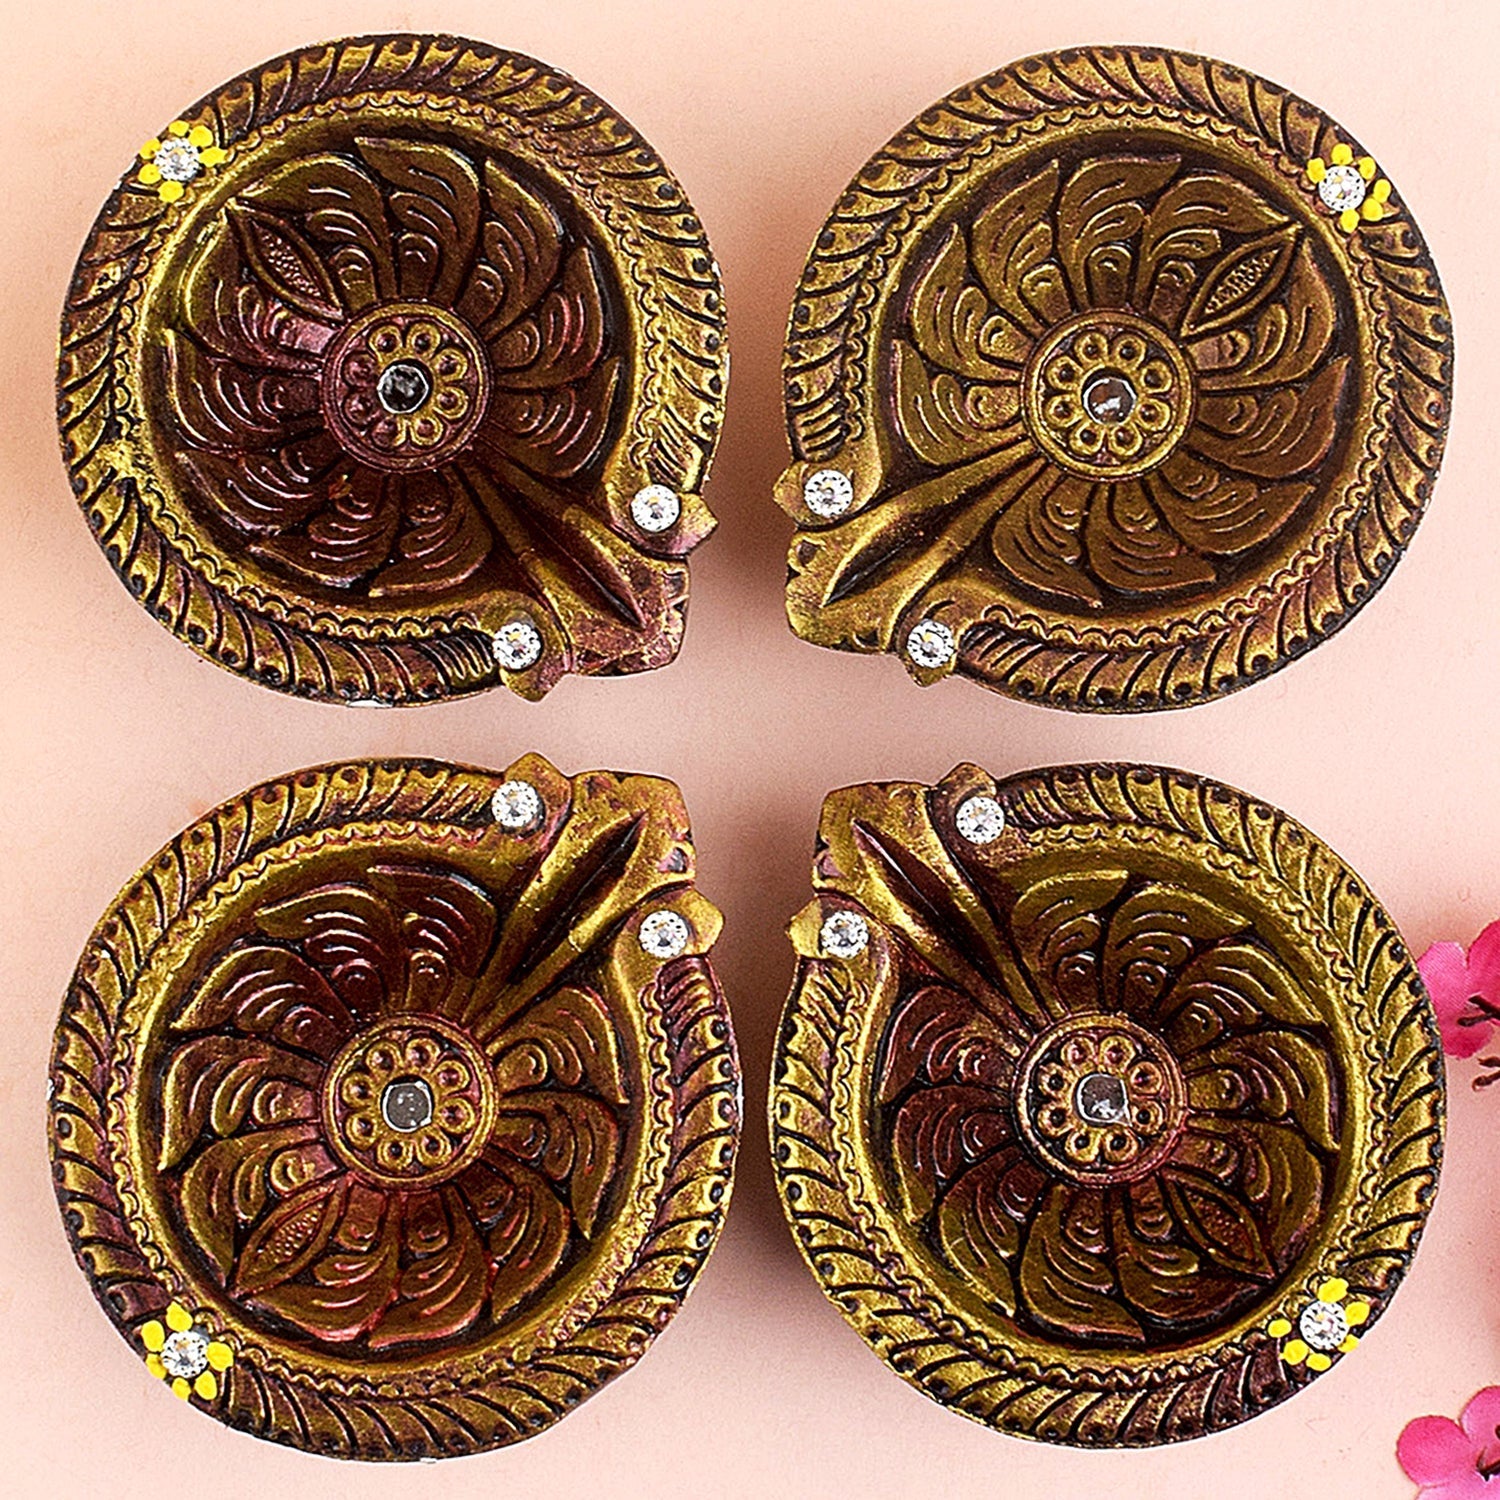 Oxidized Metallic Paint Clay Diyas Shining in Tradition